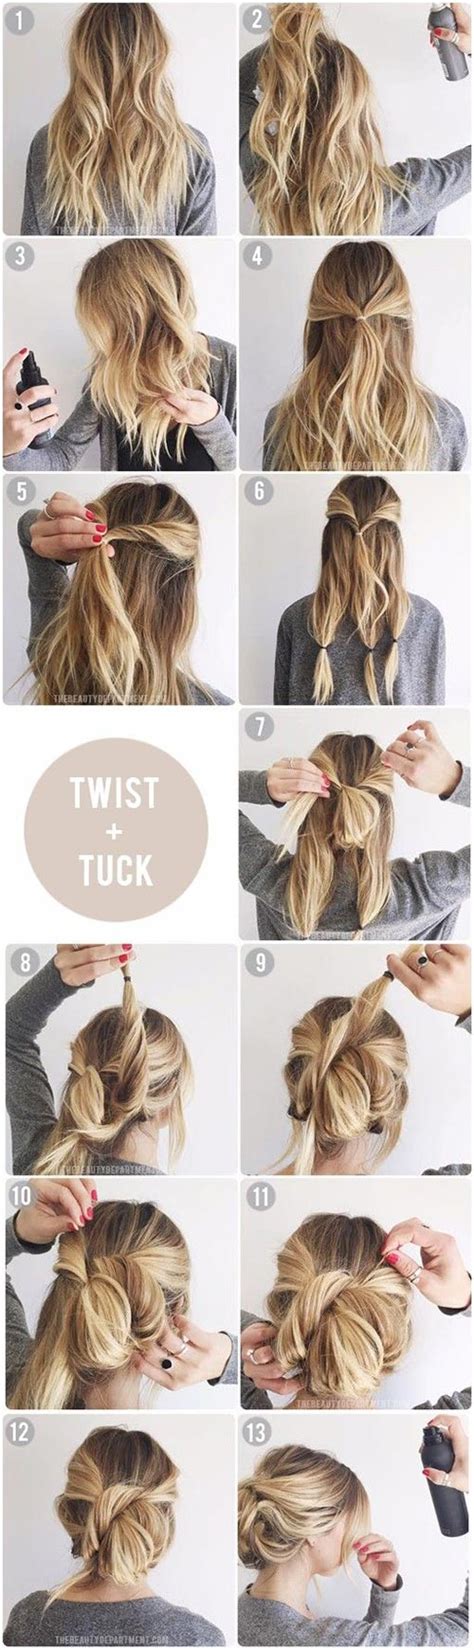 How To Make Messy Hairstyle At Home Hairstyle Guides